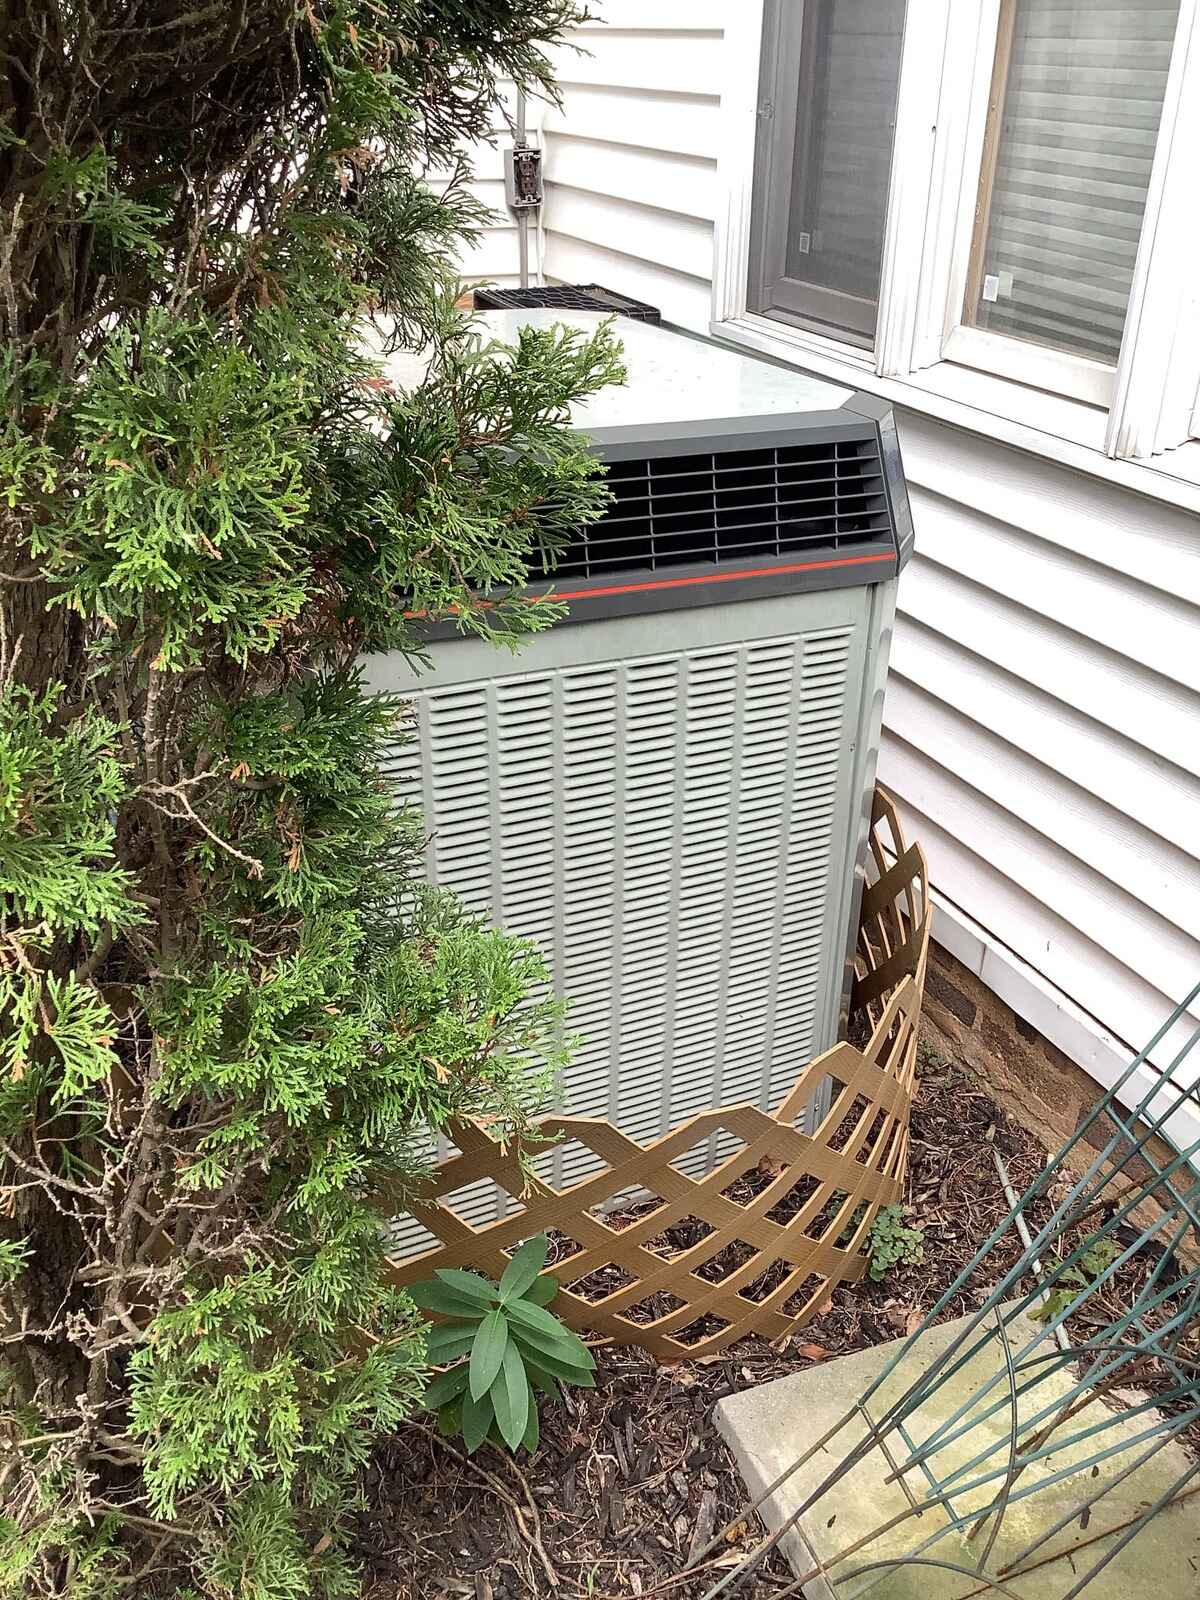 Outdoor AC Compressor surrounded by shrubbery